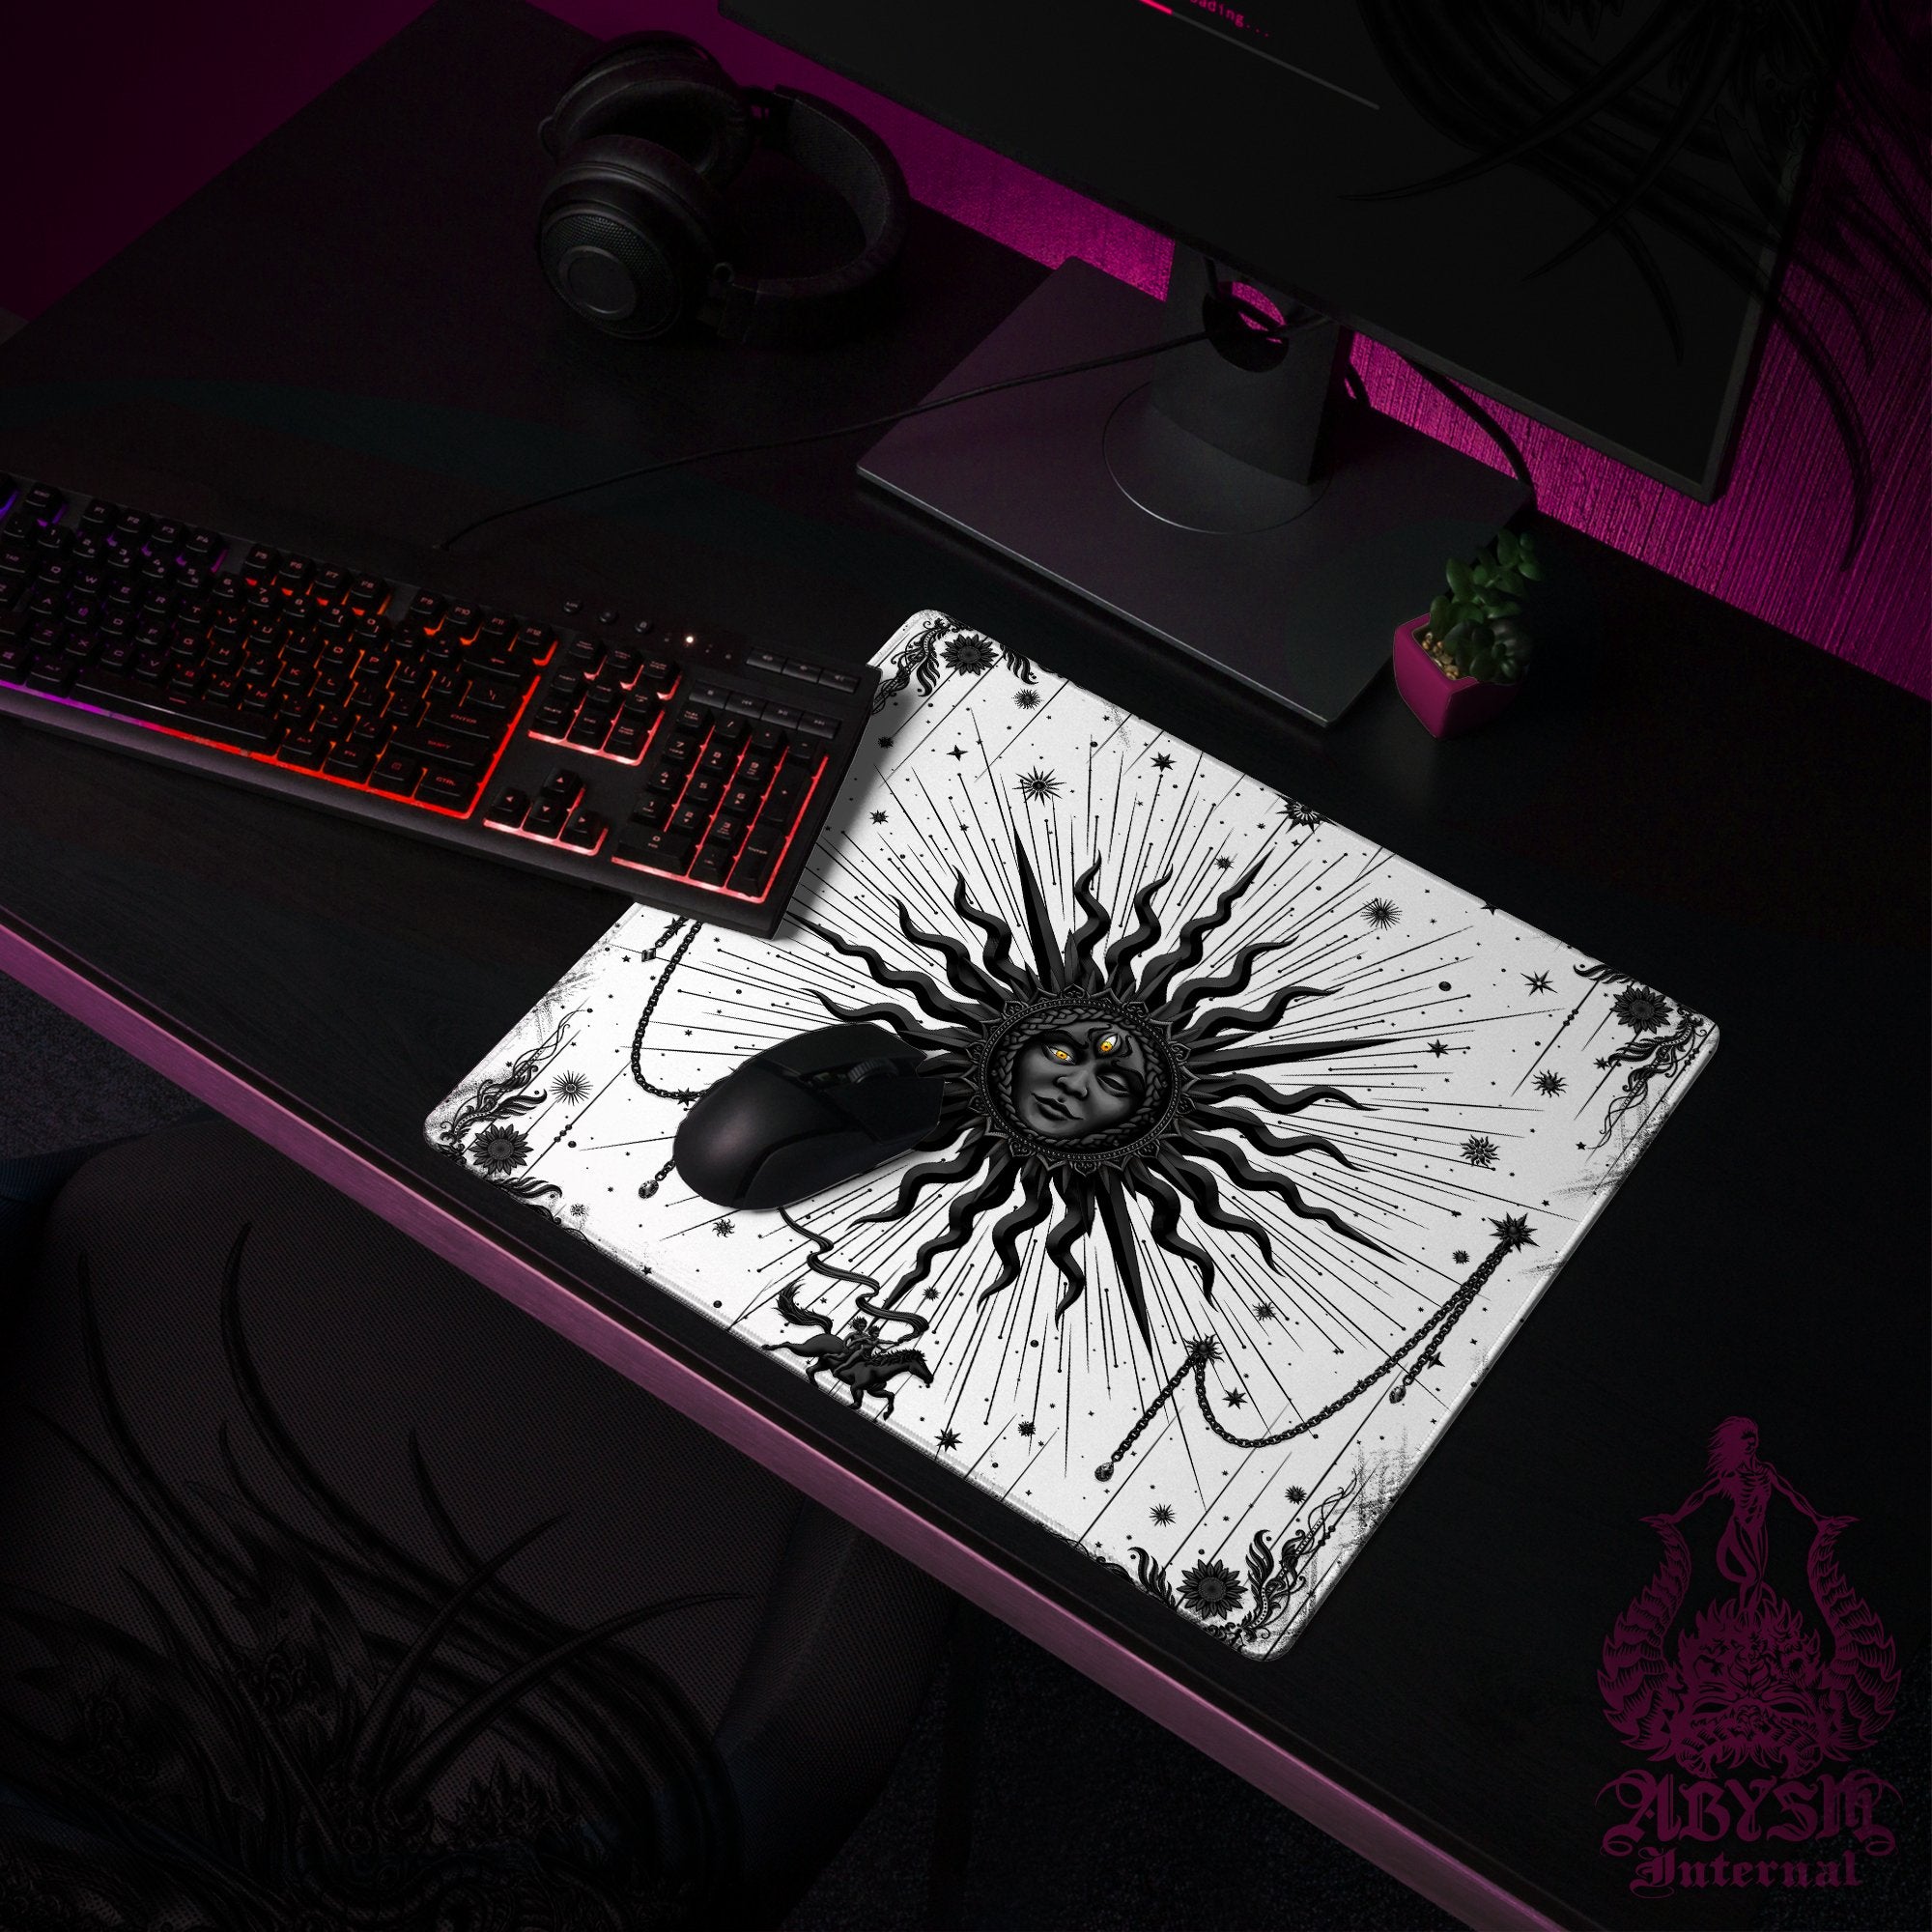 White Goth Gaming Desk Mat, Black Sun Mouse Pad, Tarot Arcana Table Protector Cover, Witchy Workpad, Esoteric Art Print - Abysm Internal